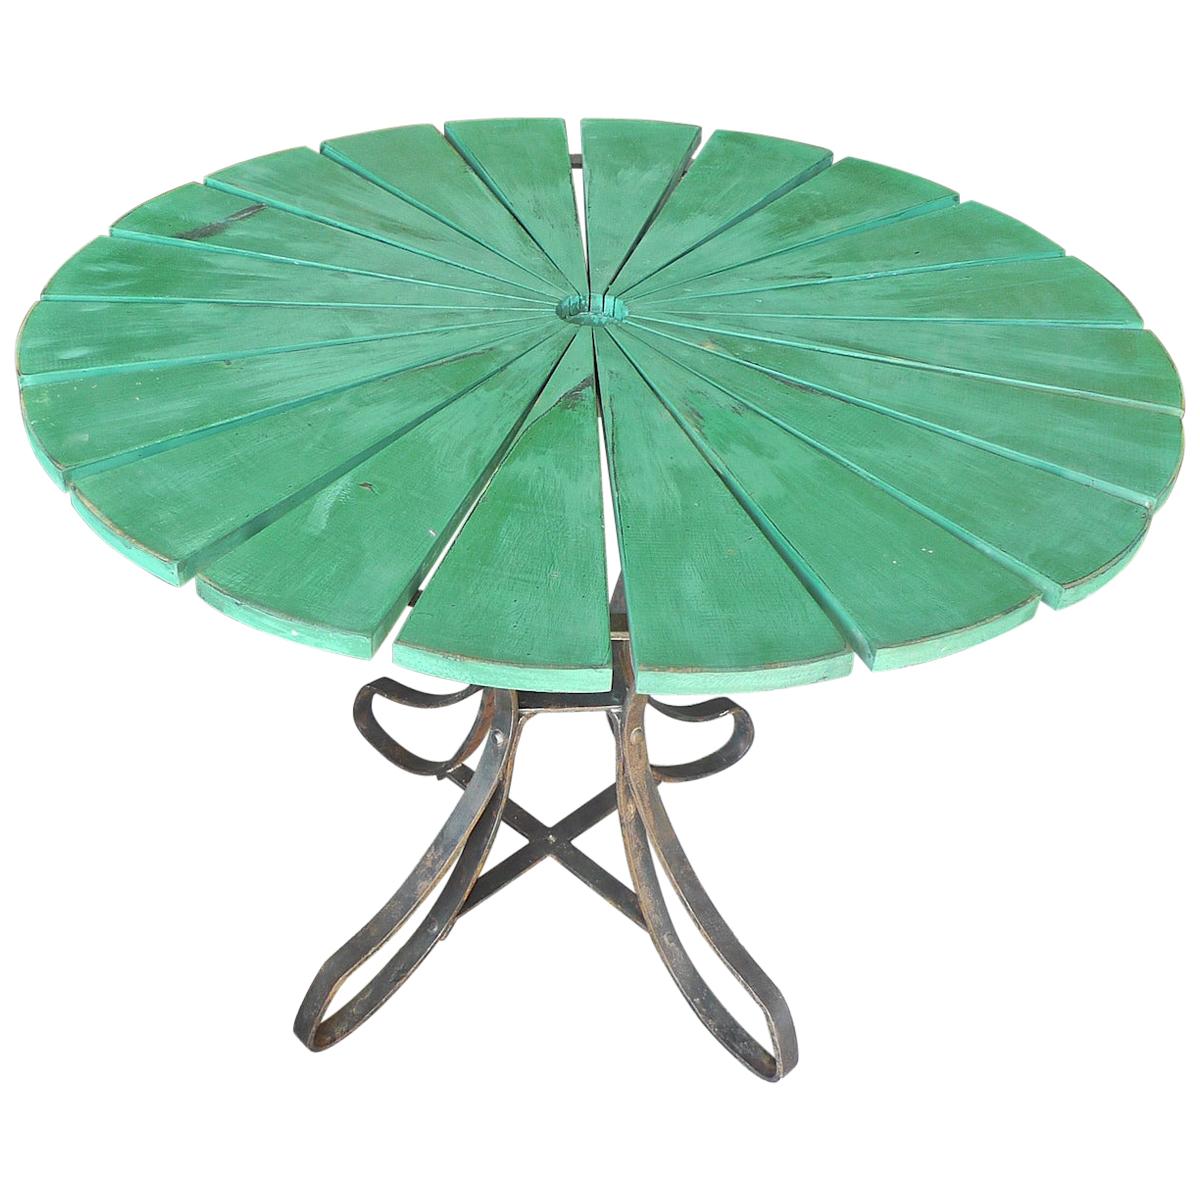 French 19th Century Wrought Iron and Painted Wood Round Garden Table.